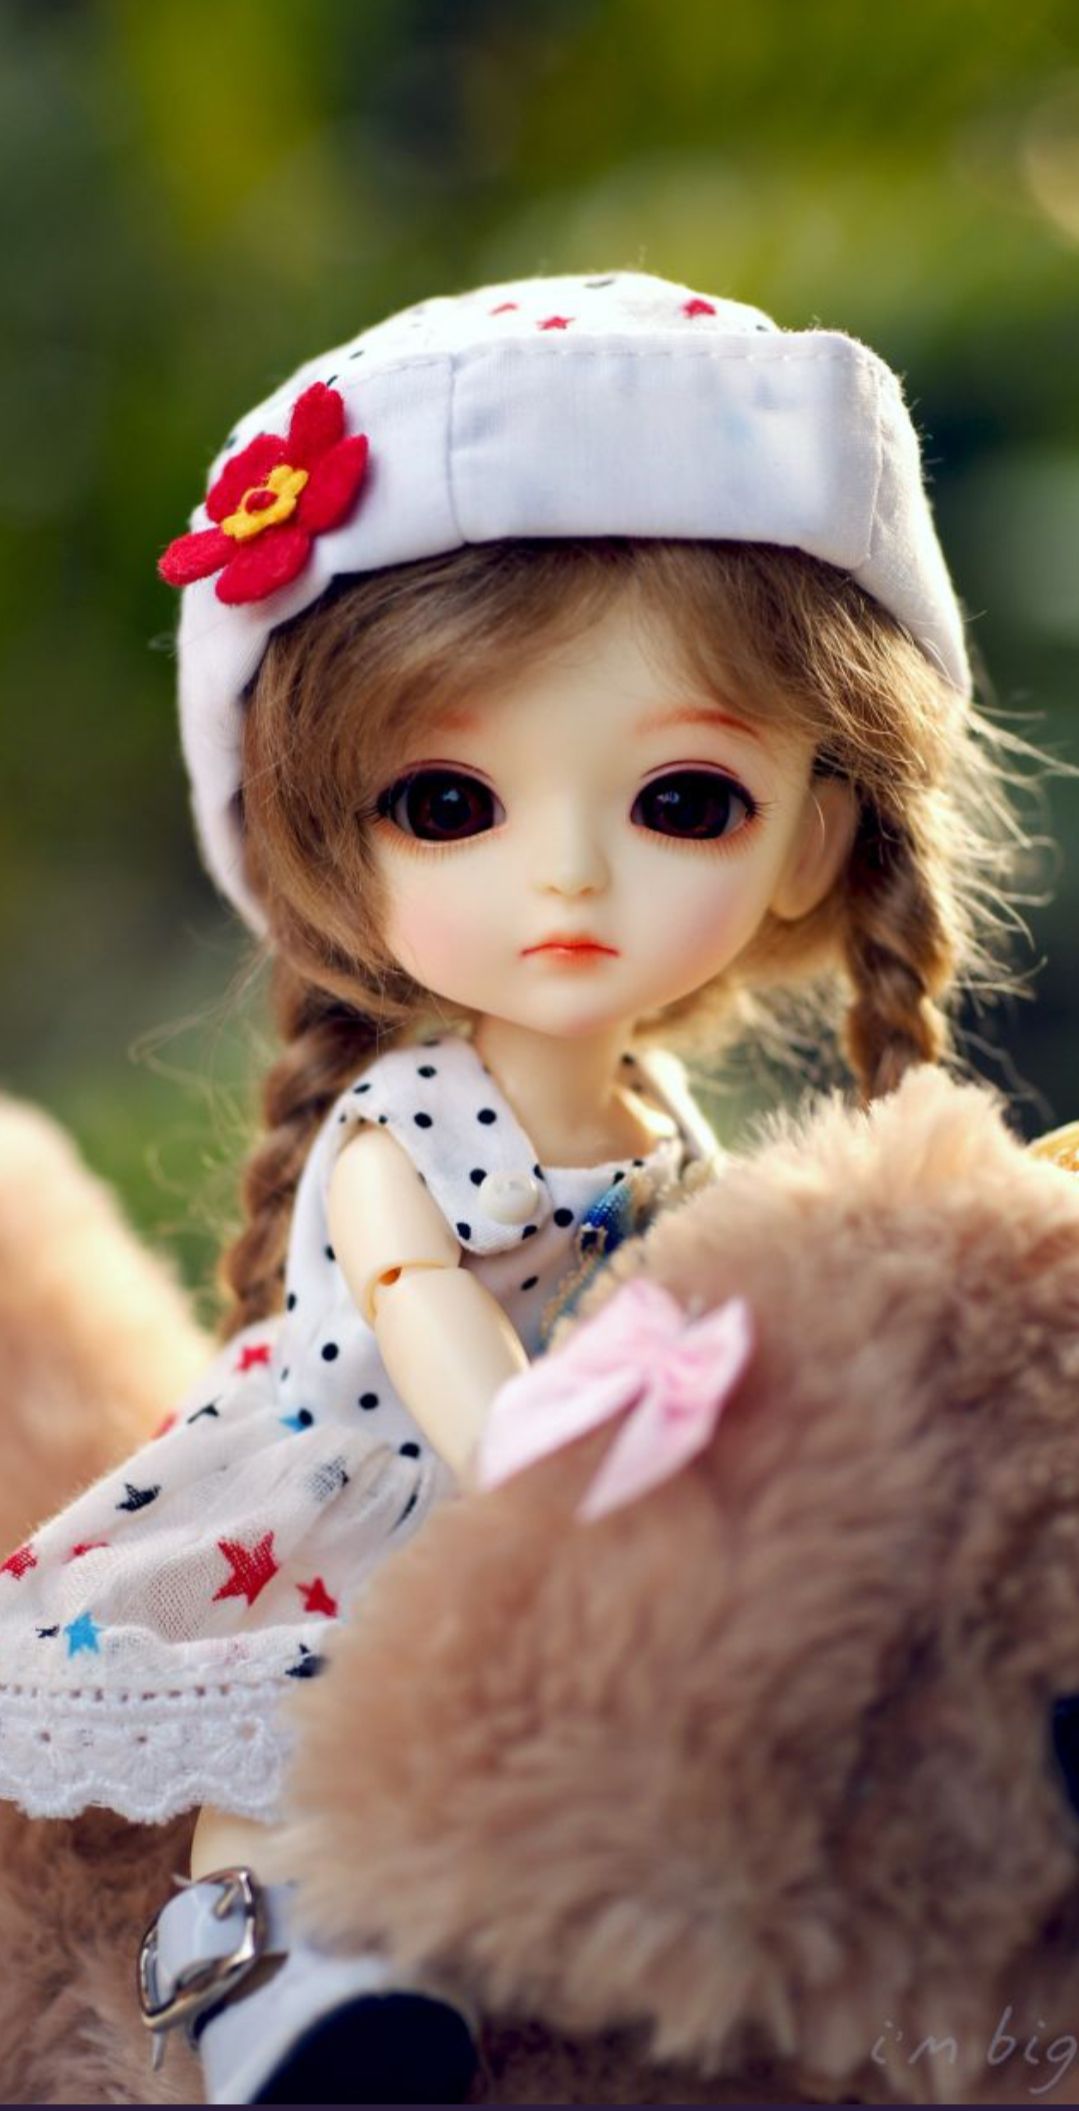 Aesthetic barbie doll wallpapers, Cute doll photos